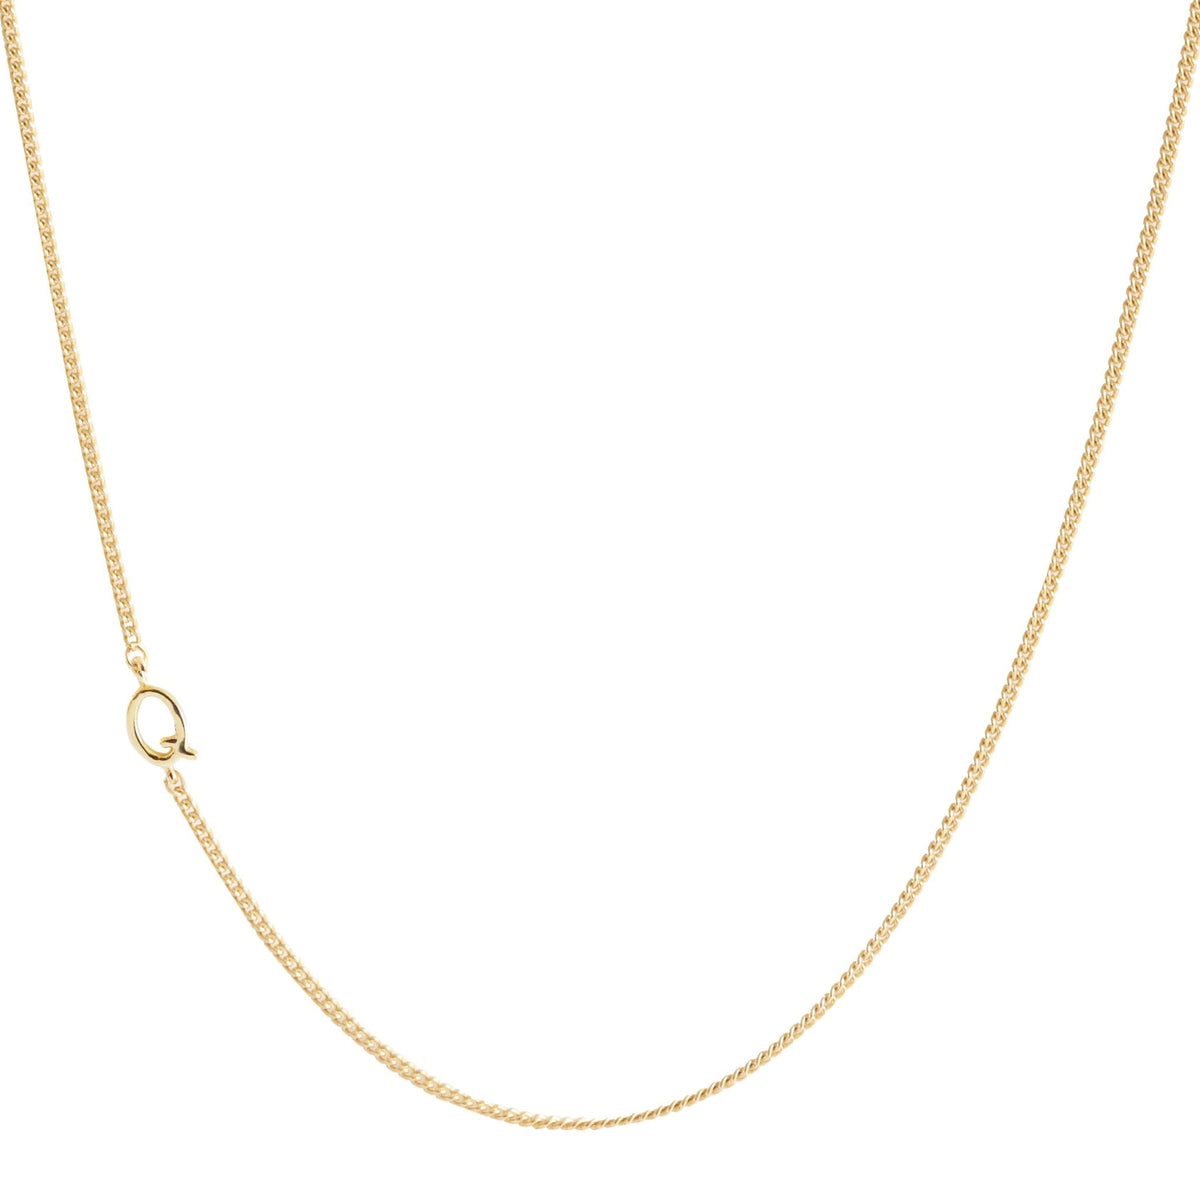 NOTABLE OFFSET INITIAL NECKLACE - Q - GOLD - SO PRETTY CARA COTTER